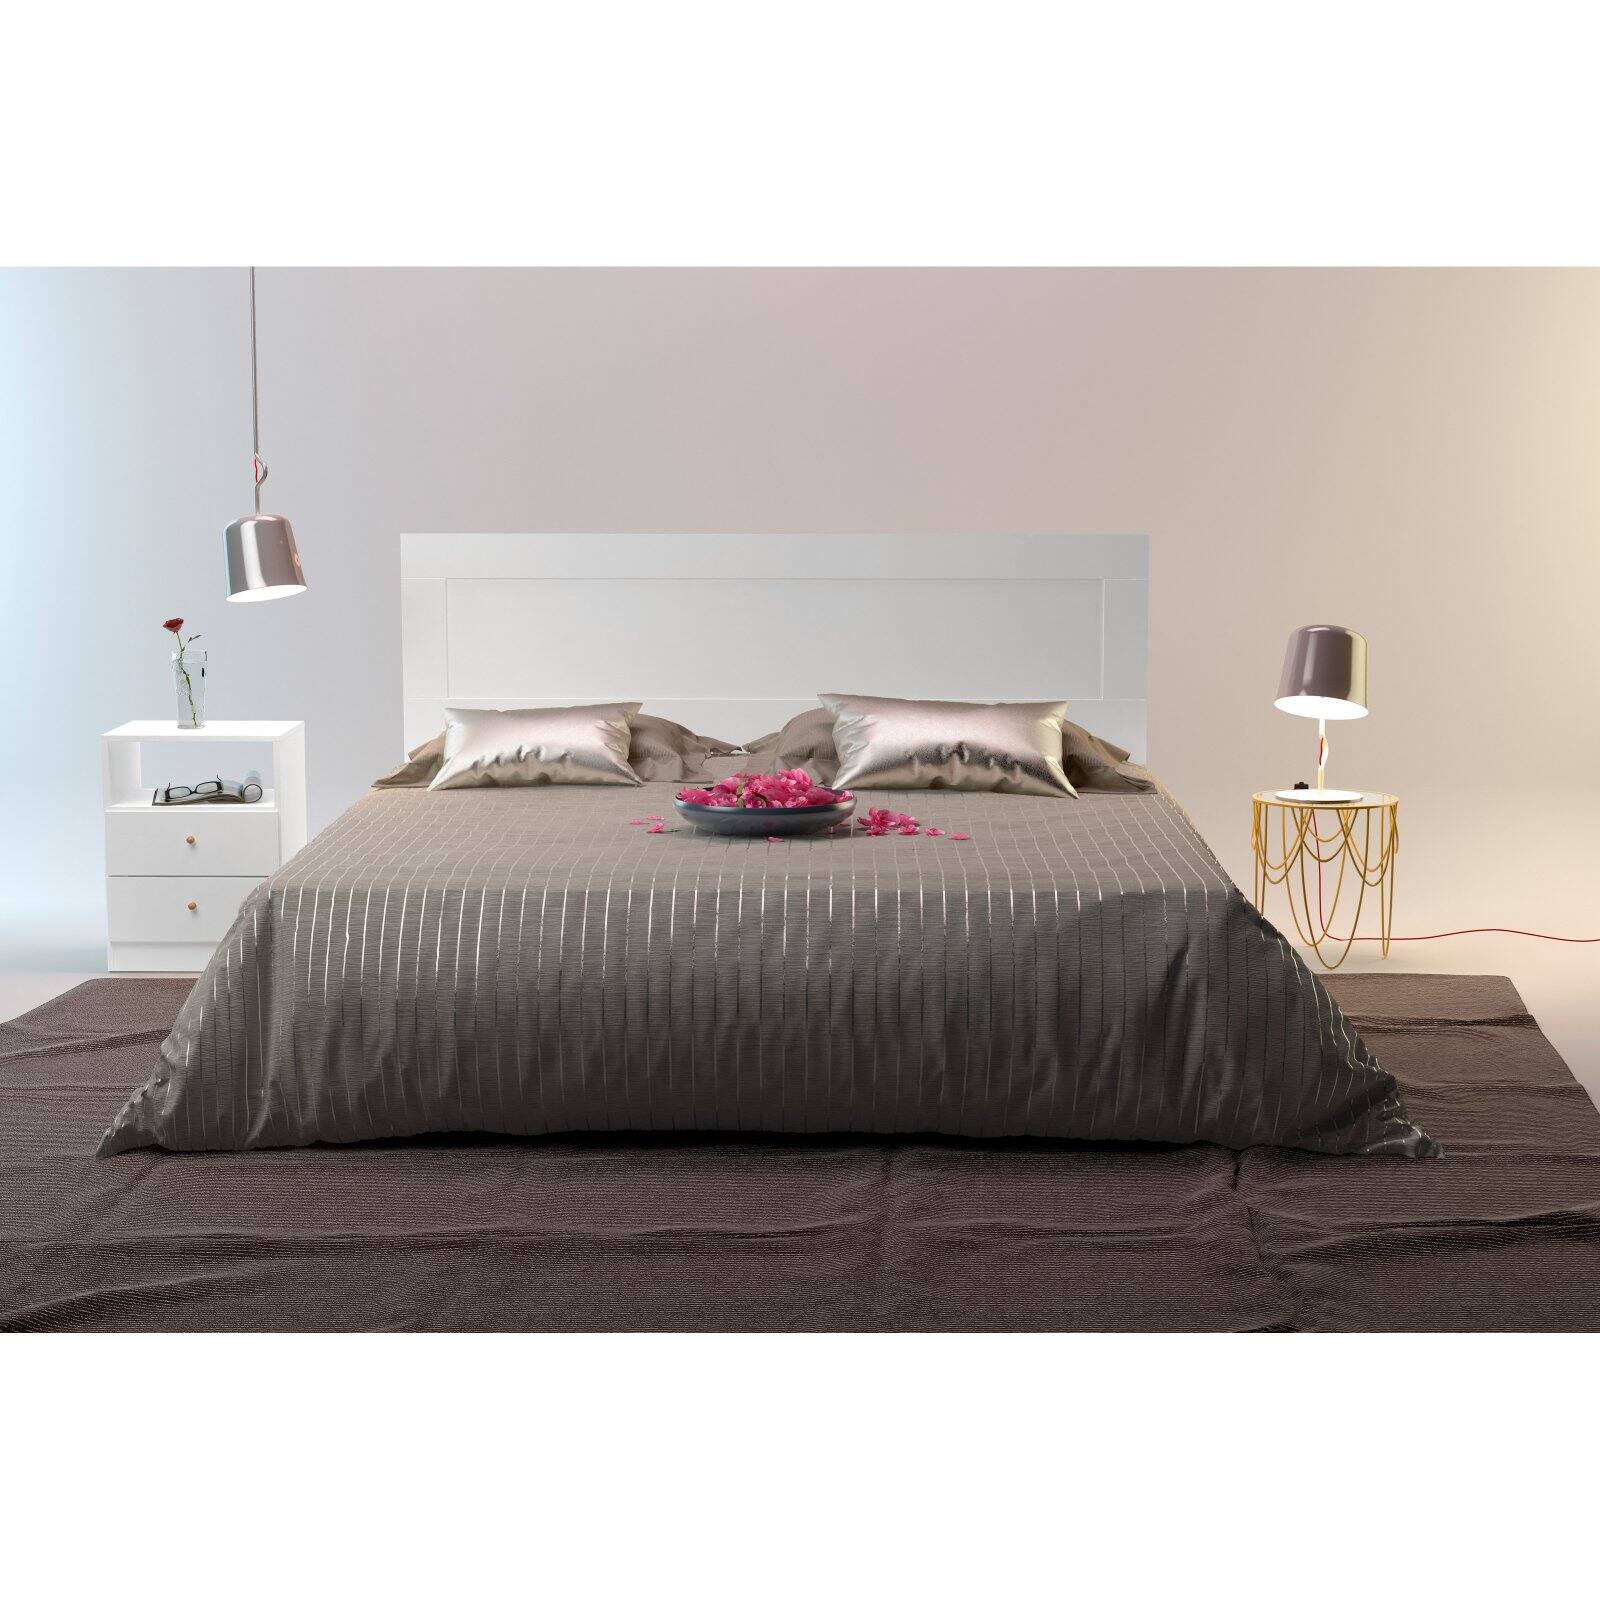 Midtown Concept Kansas Mid-Century Platform Bed with Headboard - image 1 of 11